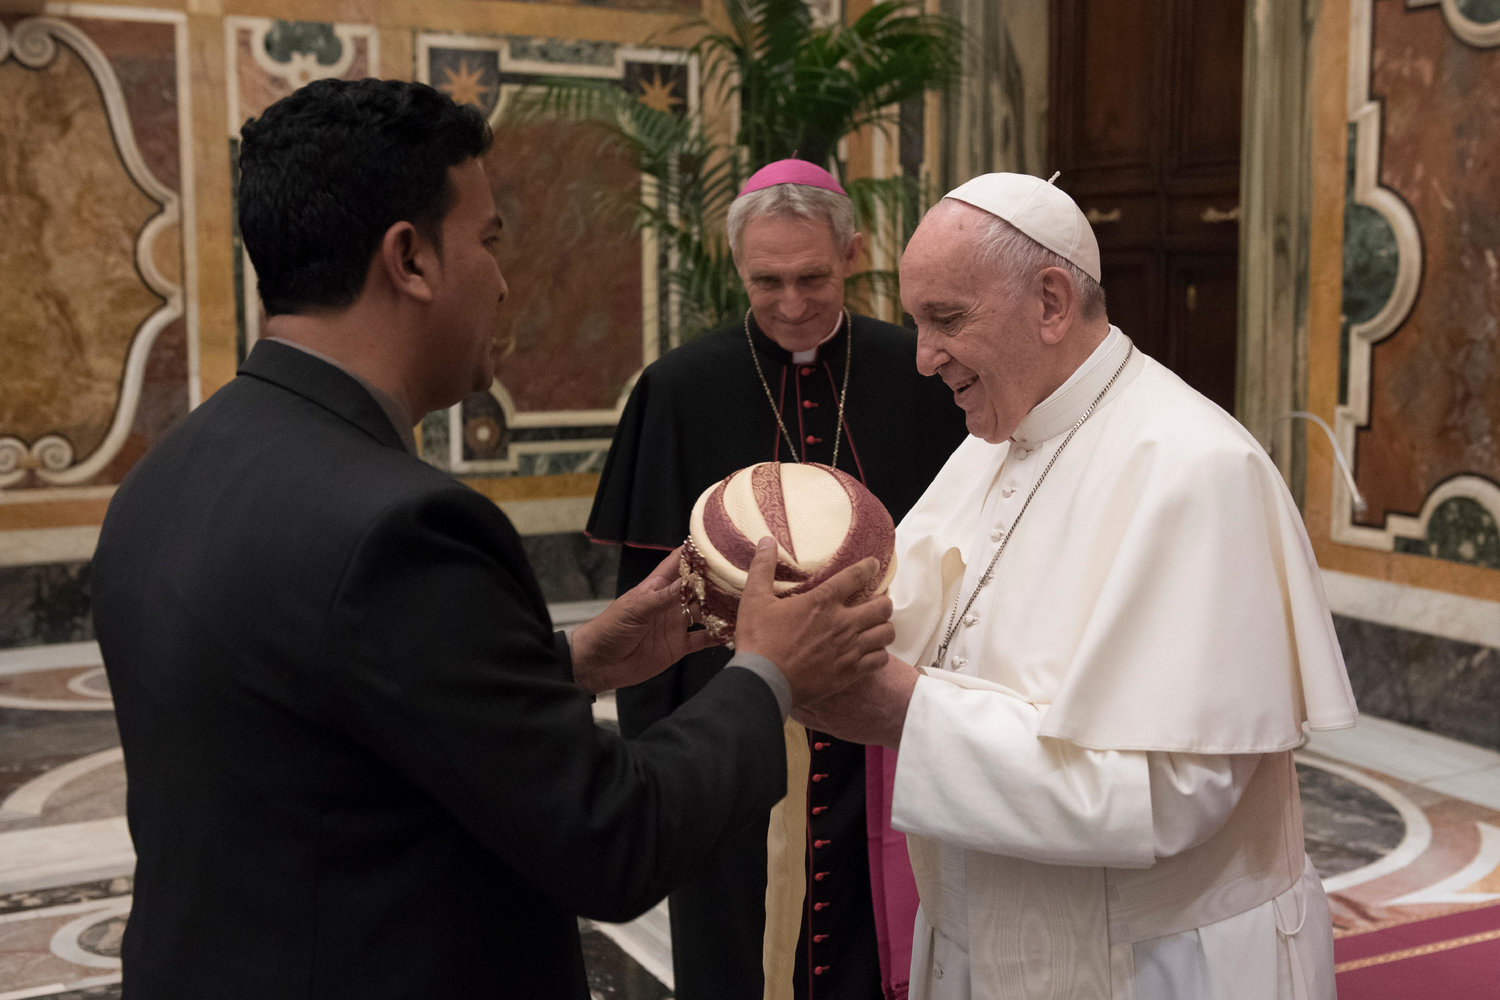 Pope Francis is presented with a turban during a meeting April 26, 2019, at the Vatican with members of the Catholic Biblical Federation. At center is Archbishop Georg Ganswein, prefect of the papal household.